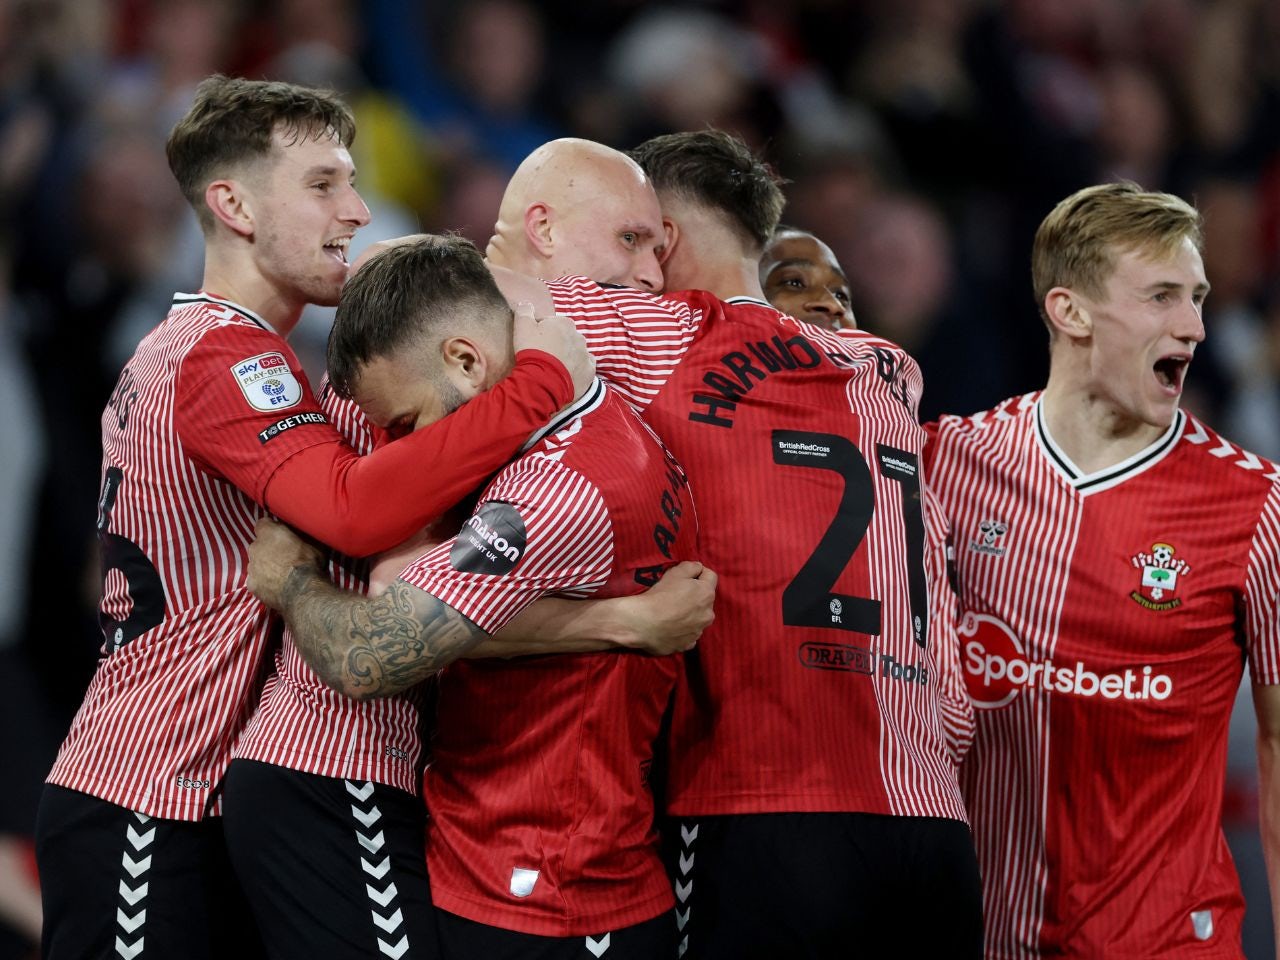 Southampton ease past West Bromwich Albion to march into Championship playoff final